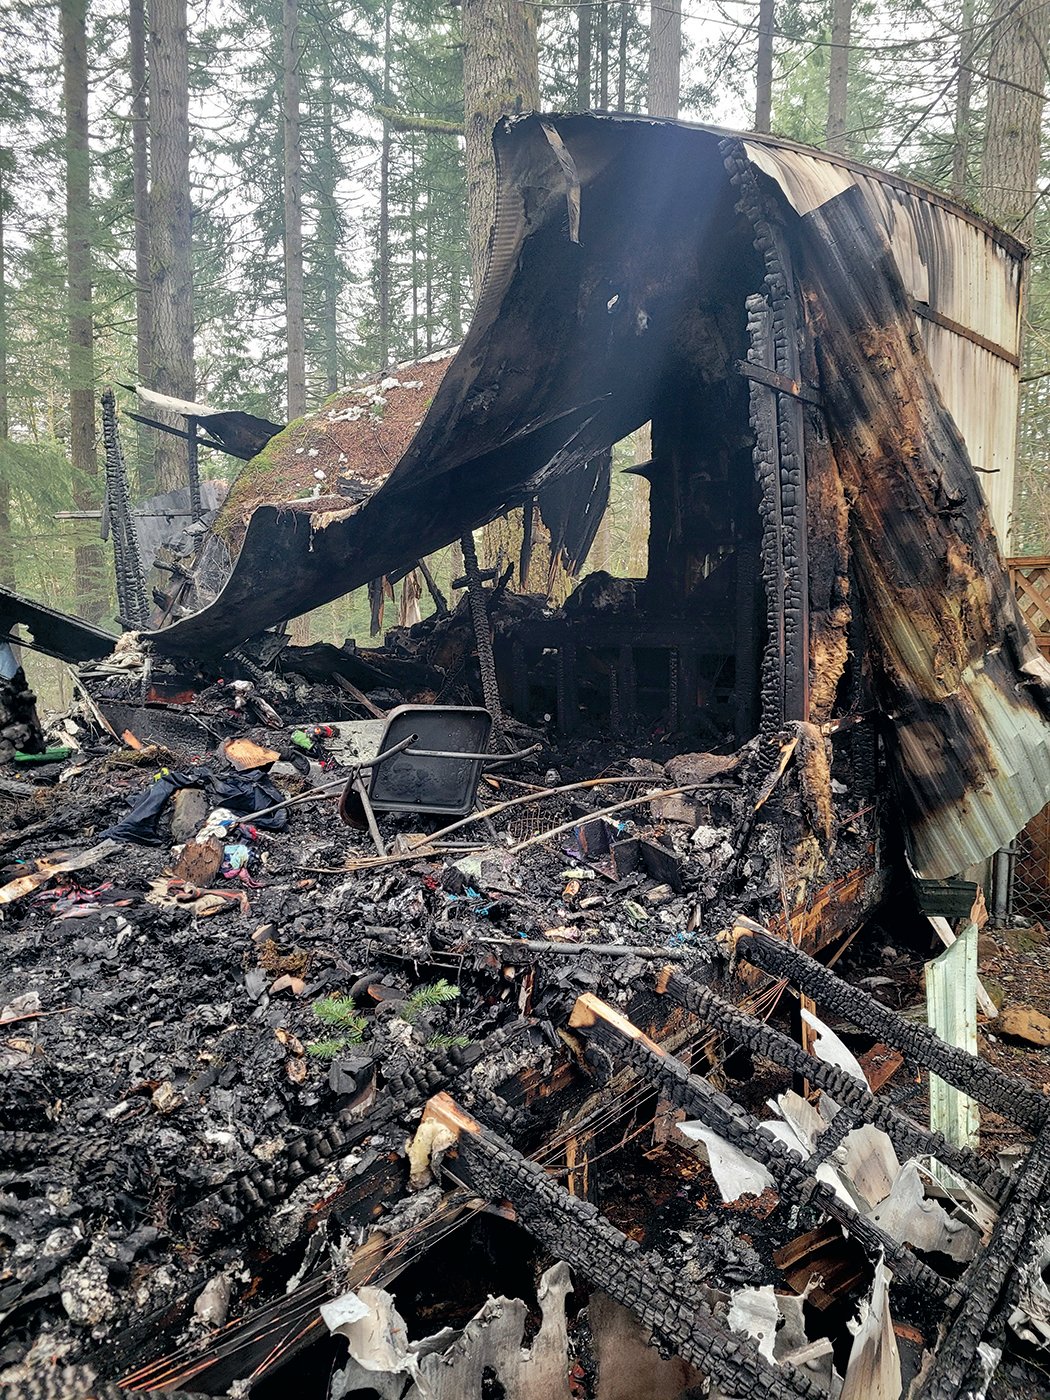 Some of the wreckage from the fire at Royal Ridges in Battle Ground is pictured.